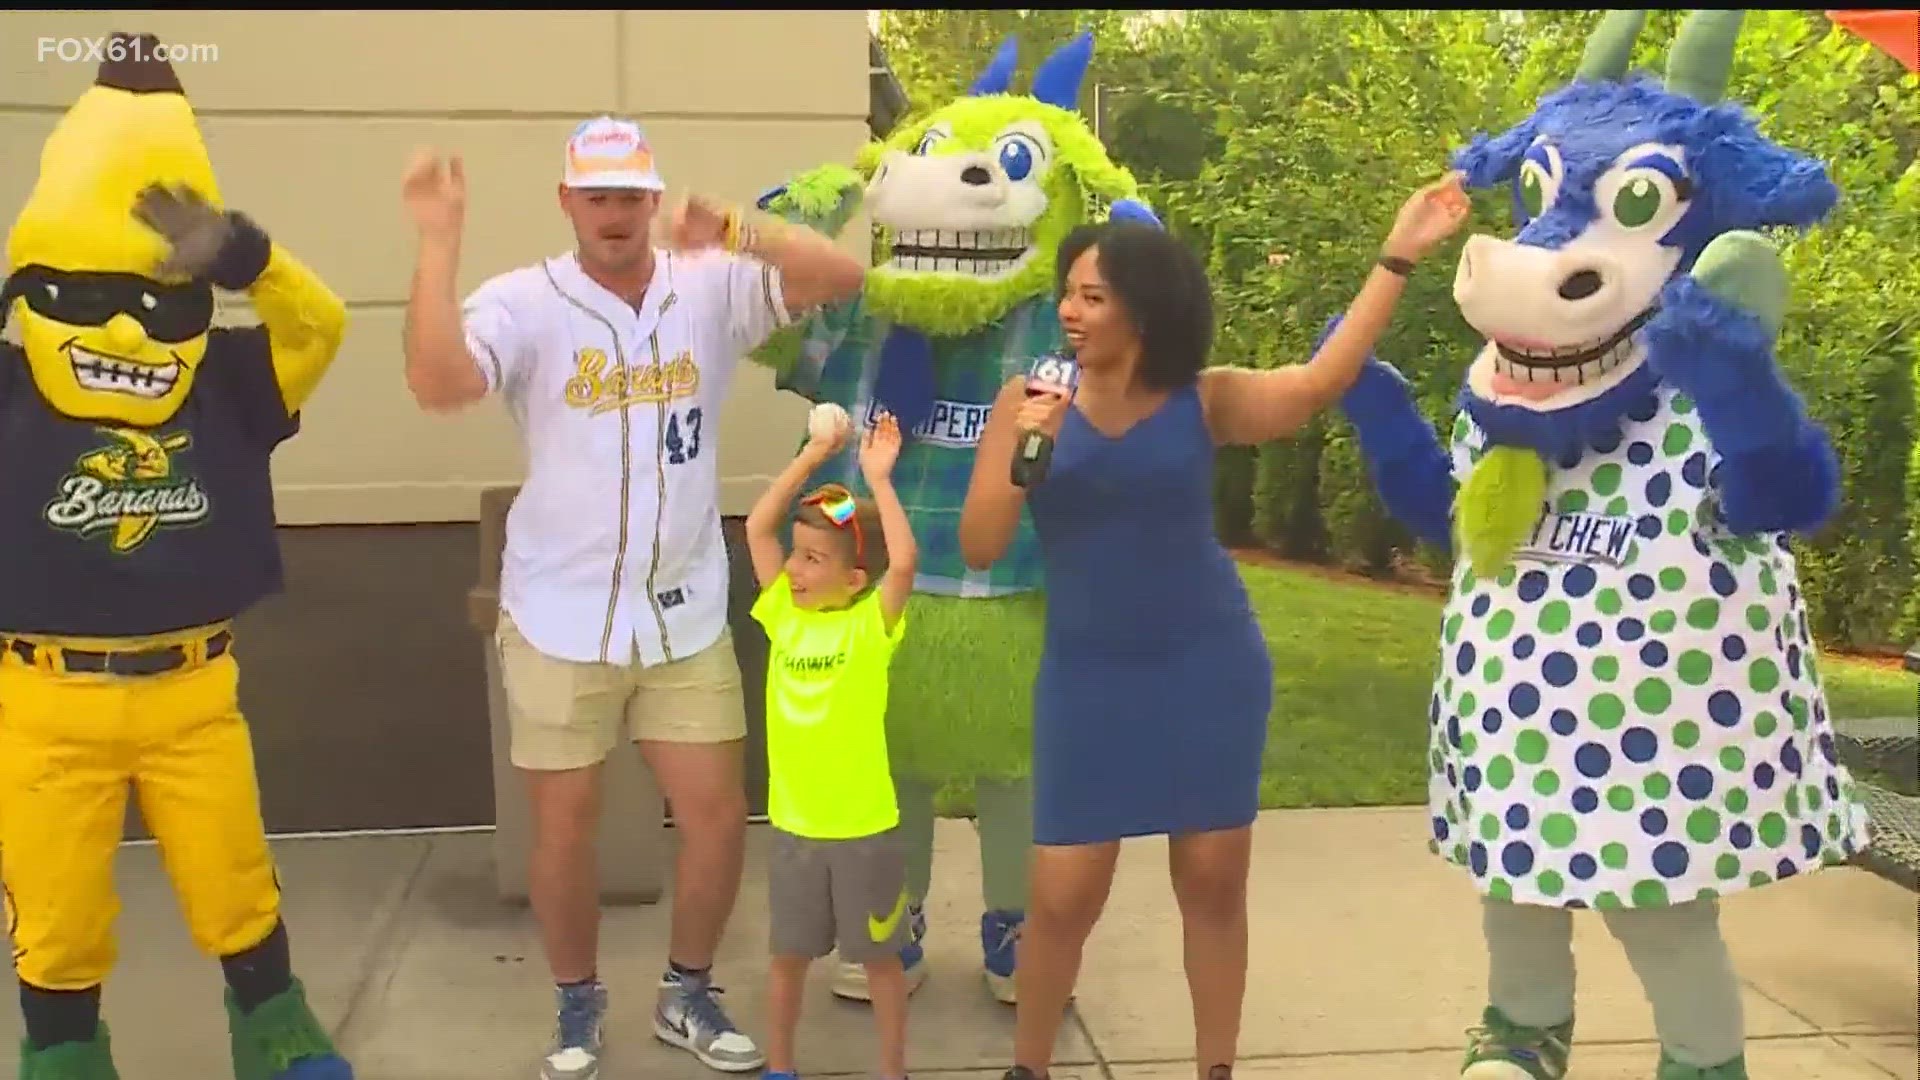 Don't call them an average baseball team! The eccentric and entertaining Savannah Bananas is making a stop in Hartford as part of their world tour.